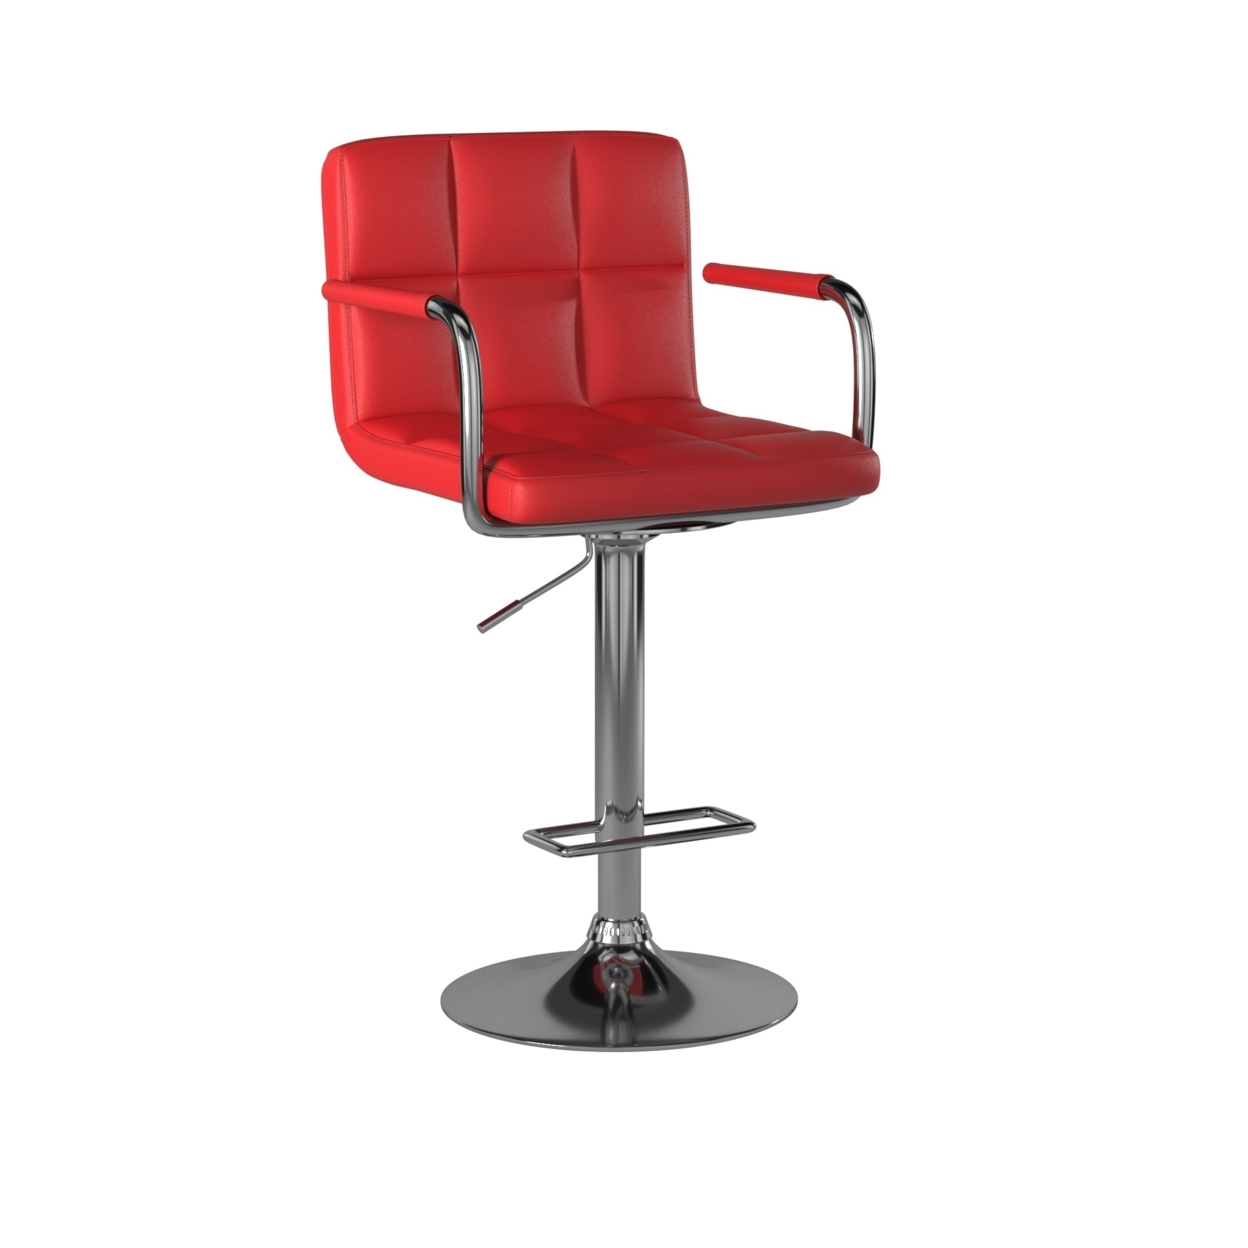 Leatherette Swivel Barstool With Square Stitched Details, Red And Silver- Saltoro Sherpi